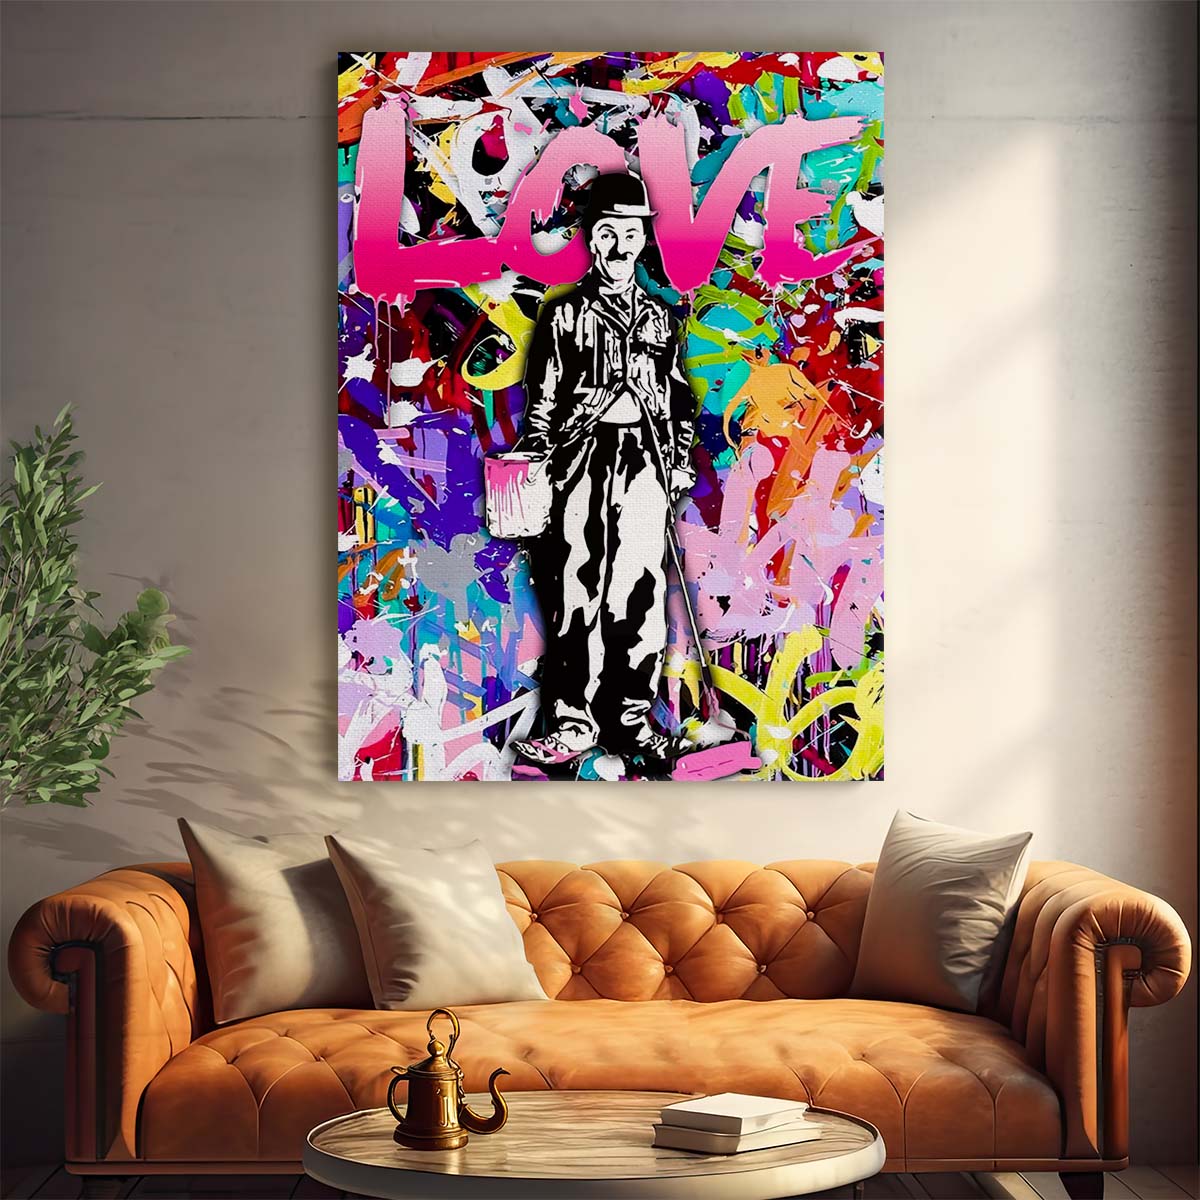 Banksy Love Chaplin Abstract Graffiti Wall Art by Luxuriance Designs. Made in USA.